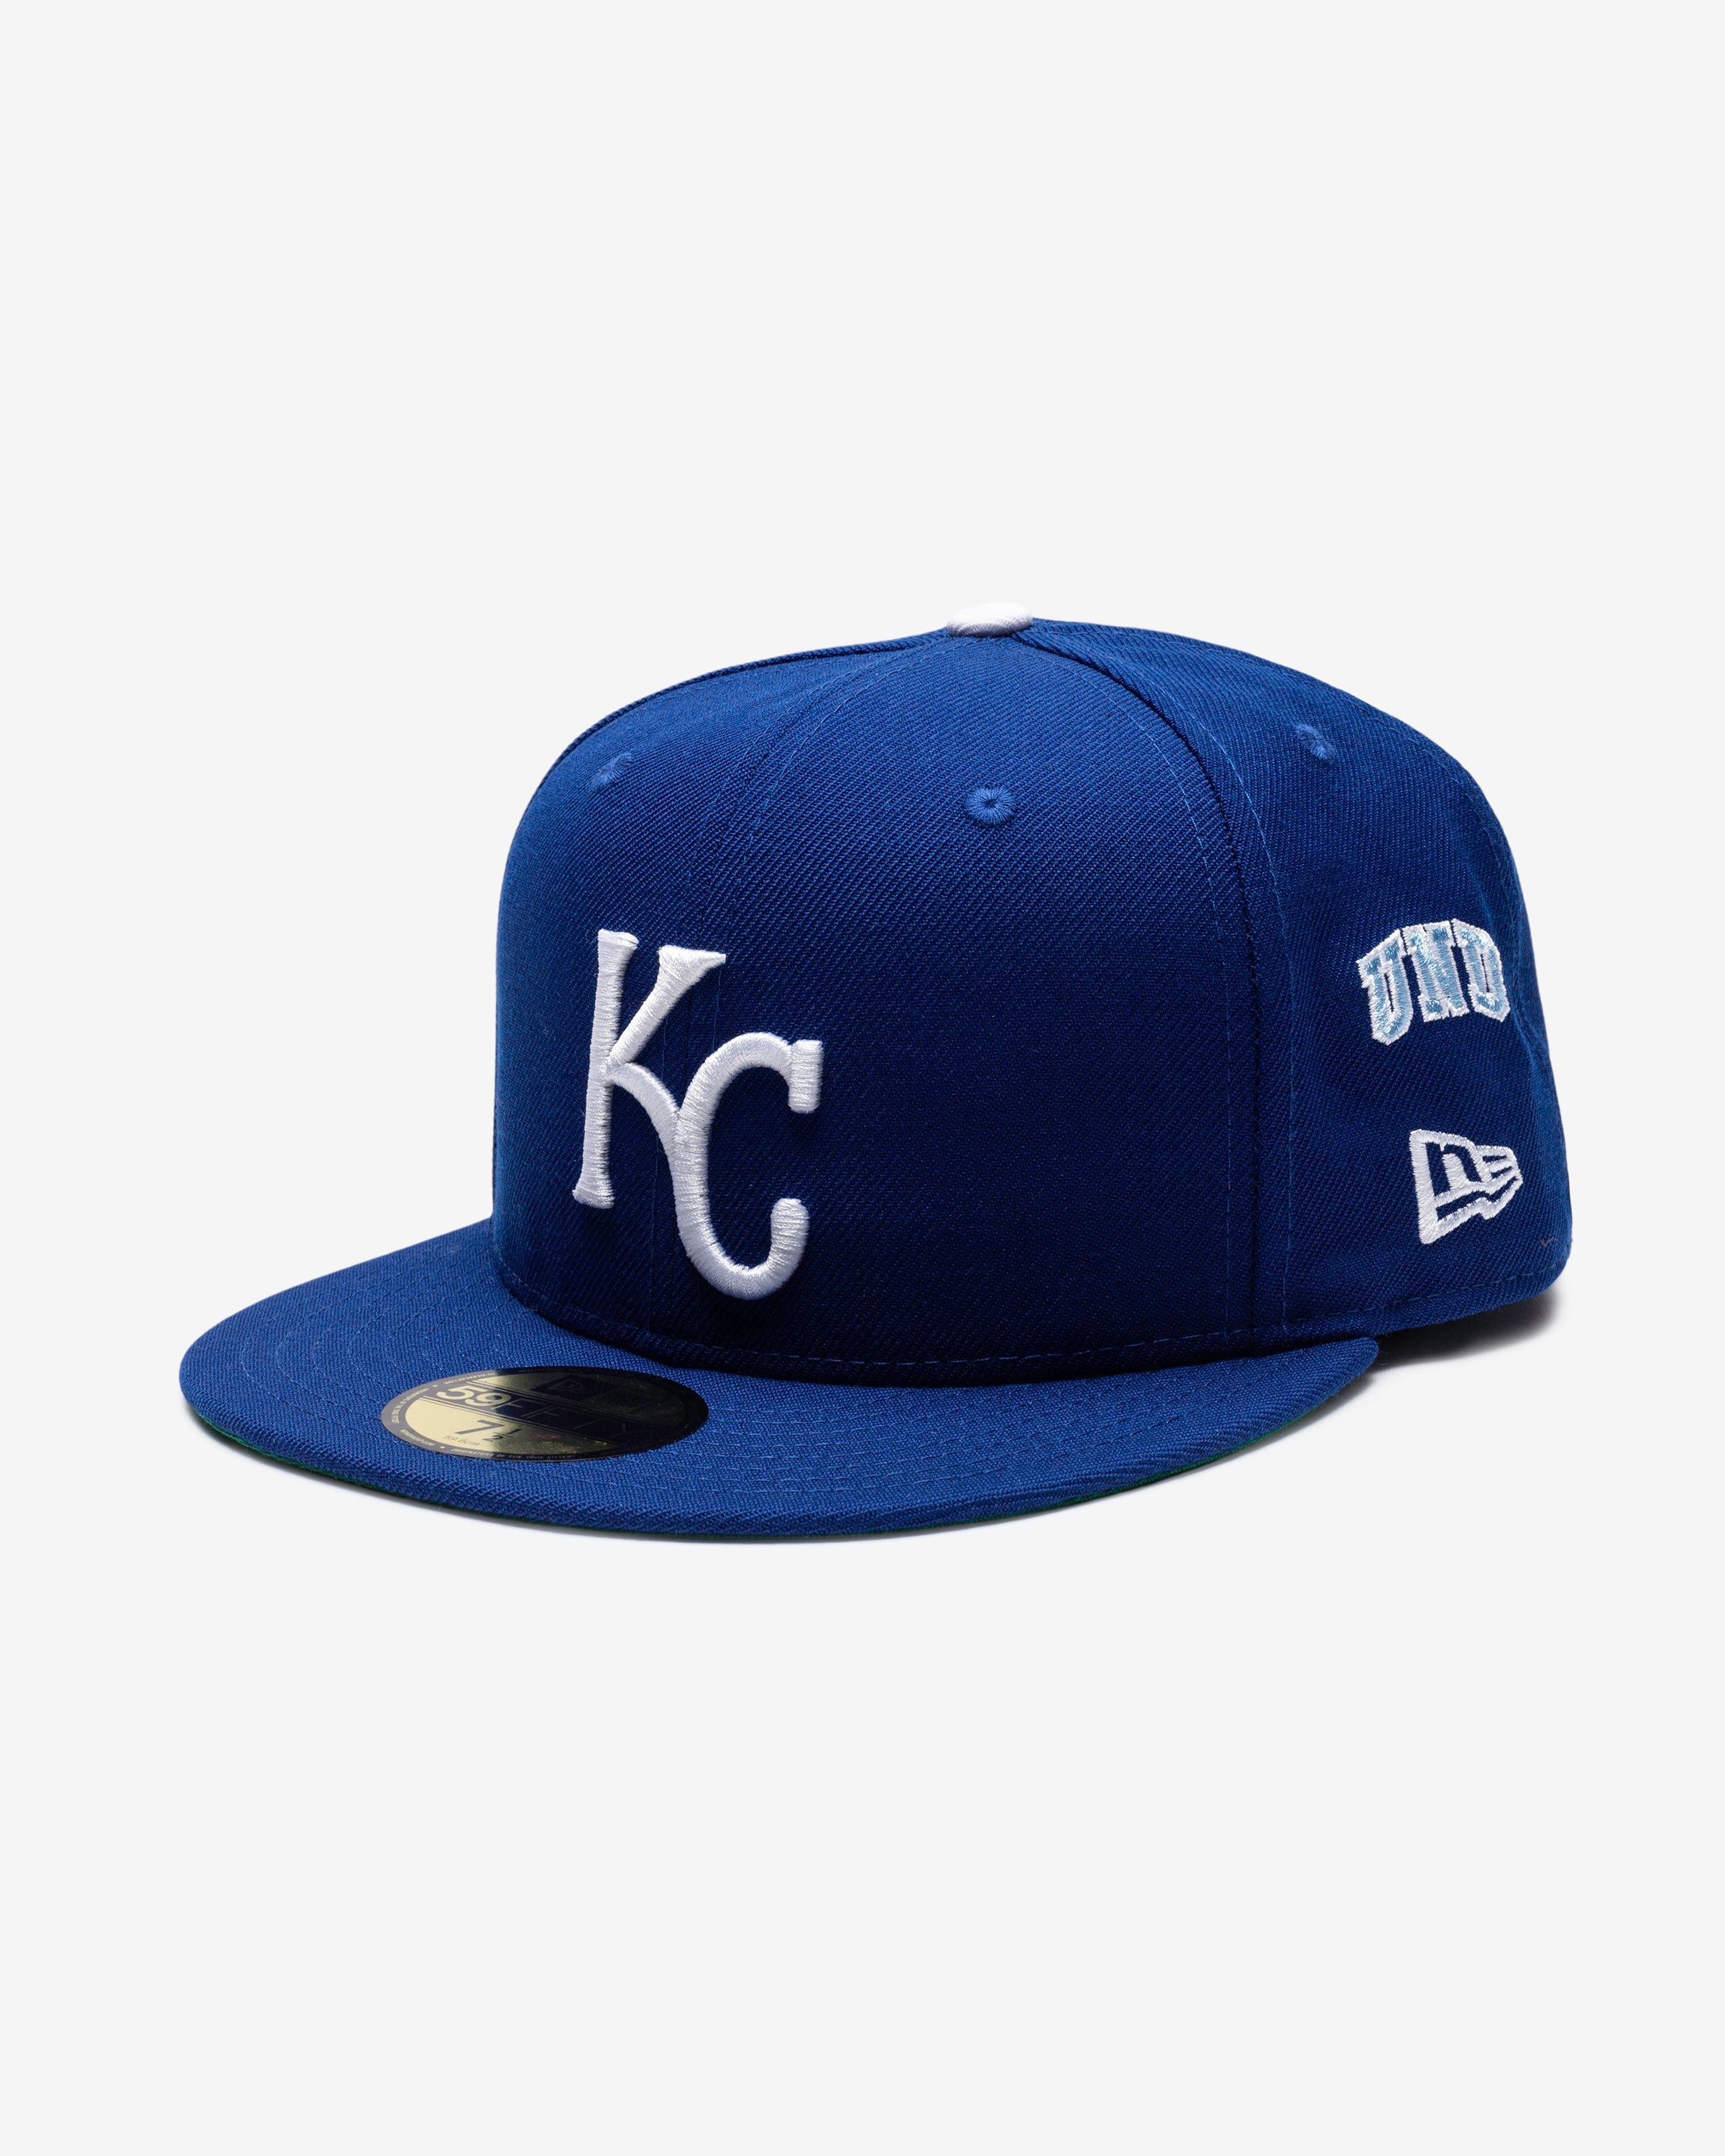 UNDEFEATED X NE X MLB FITTED - KANSAS CITY ROYALS – Undefeated